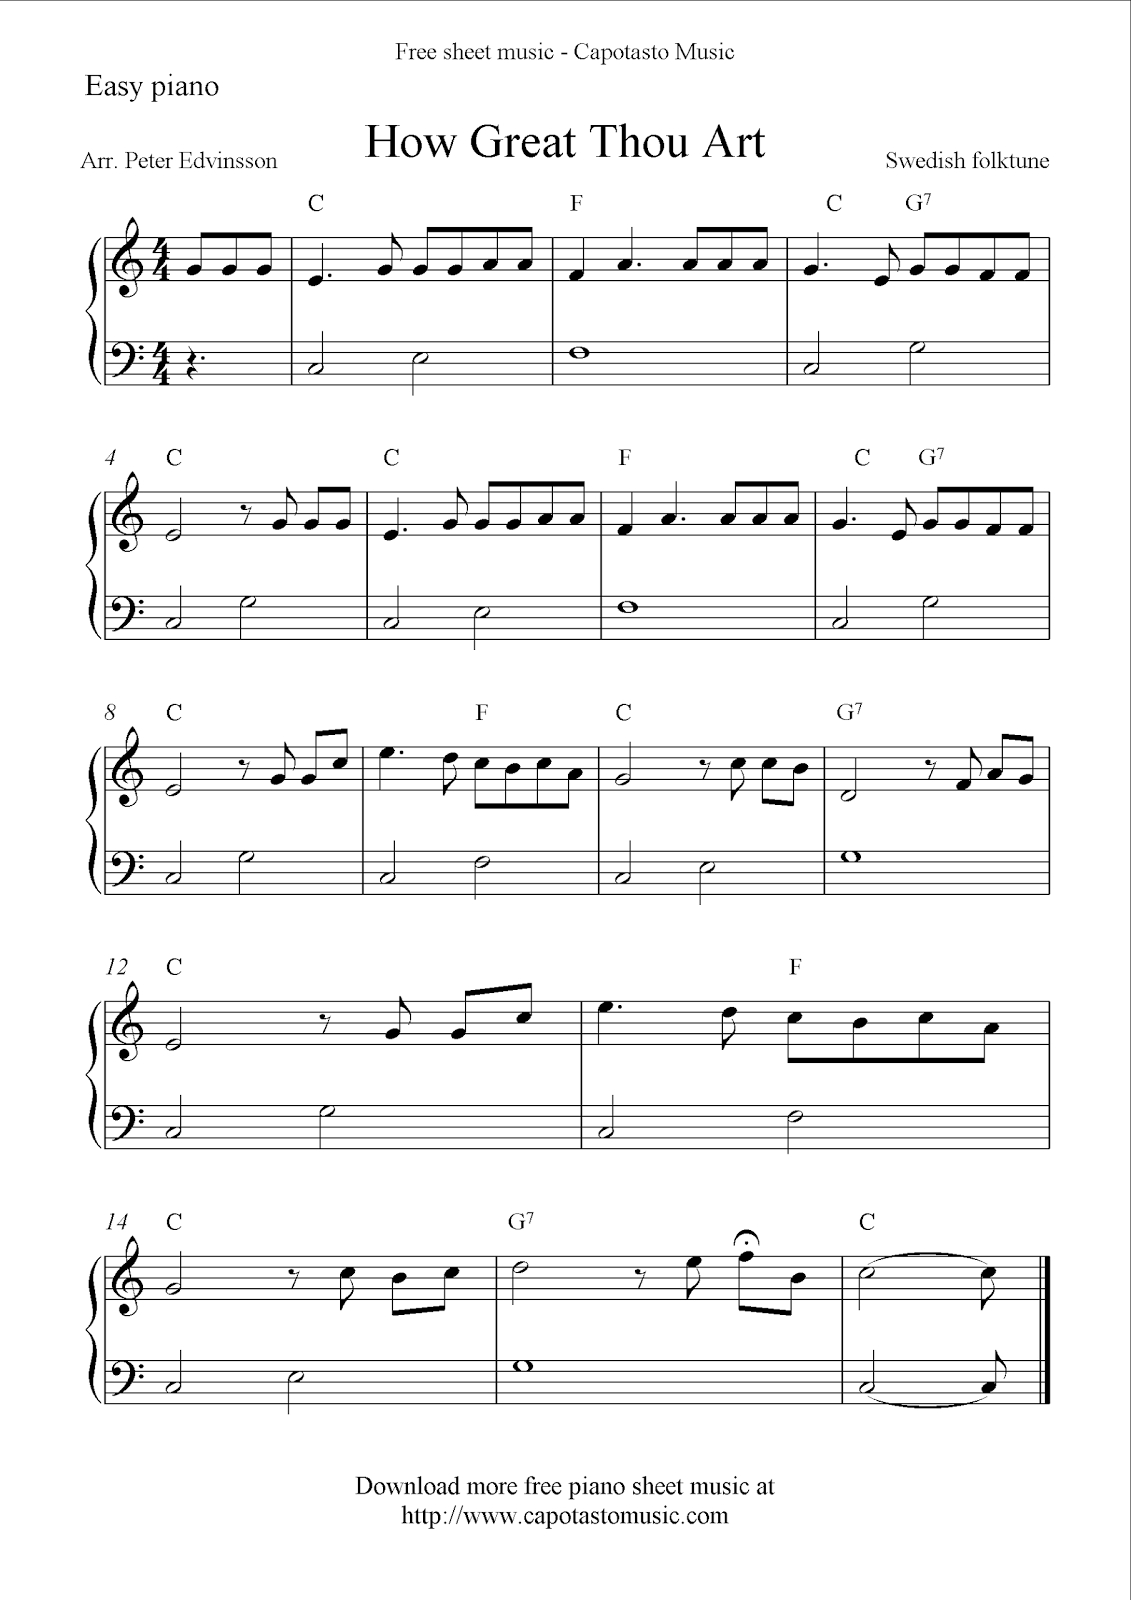 Free Easy Piano Sheet Music, How Great Thou Art - Free Printable Sheet Music For Voice And Piano